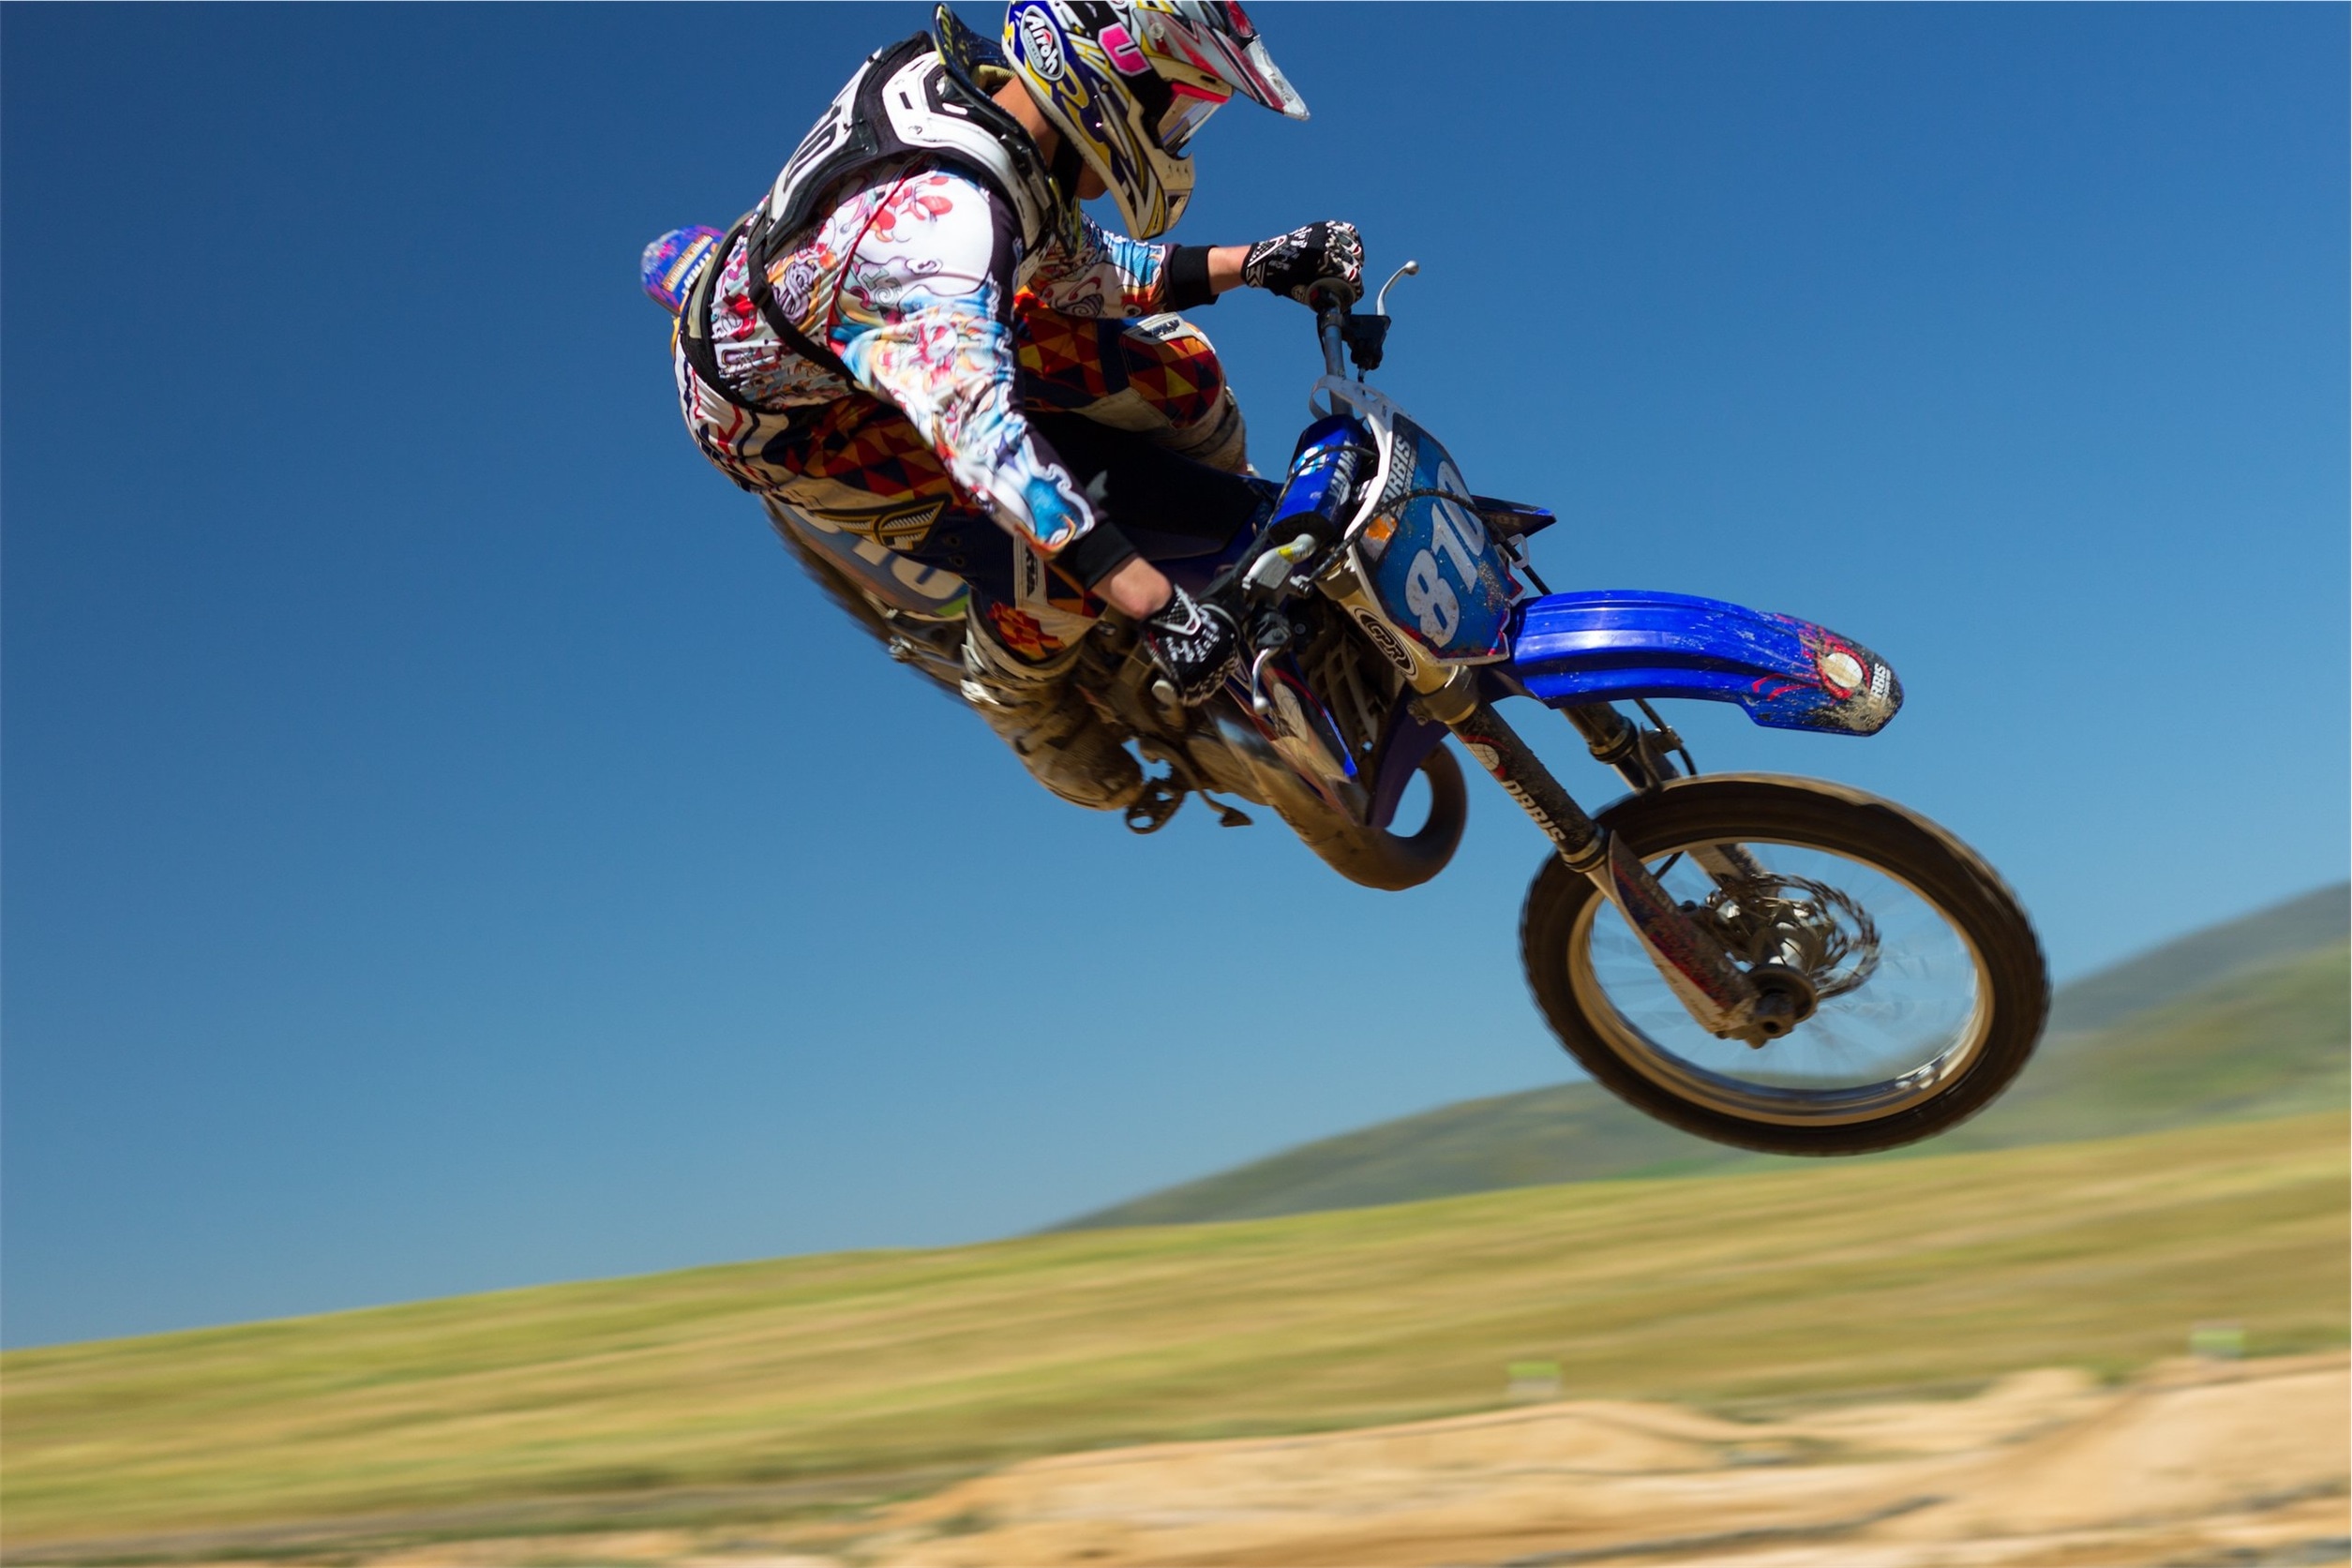 white blue and red motocross suit and blue yamaha motocross dirt bike